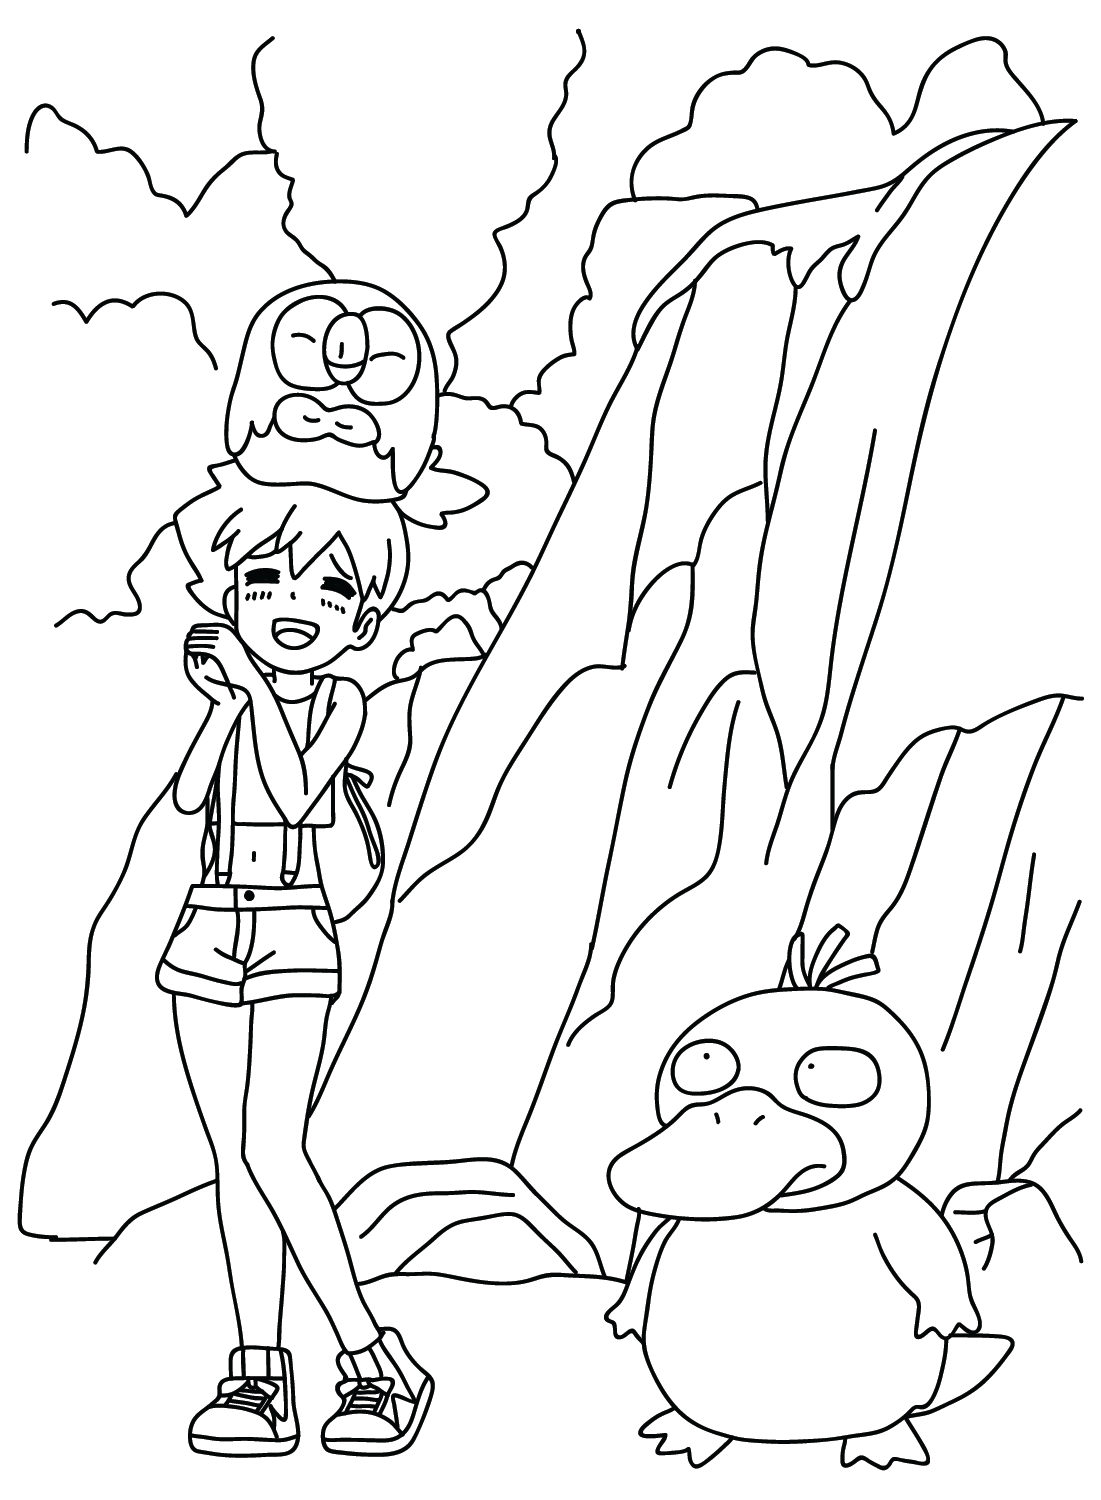 Misty of Pokemon Coloring Page from Misty